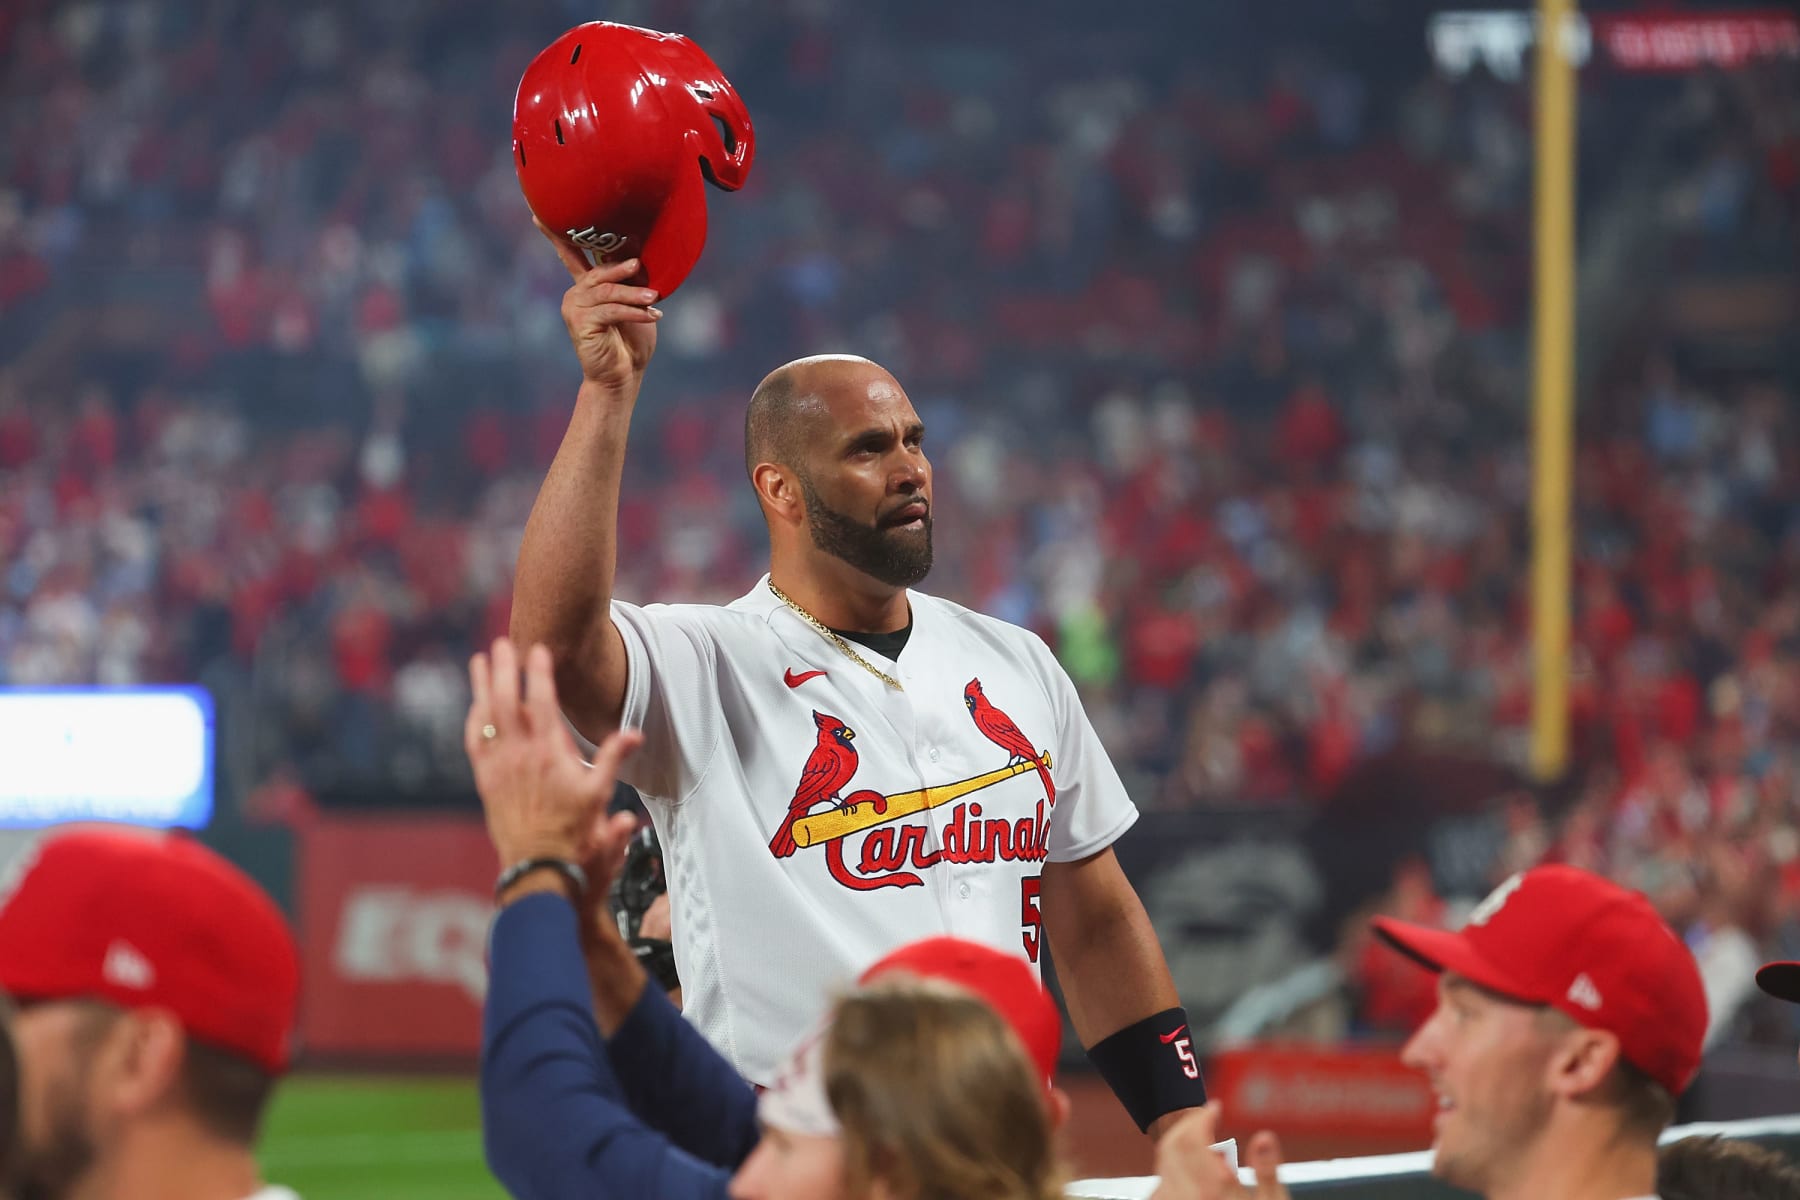 Former MLB player Rabe marvels at longevity of Cardinals trio